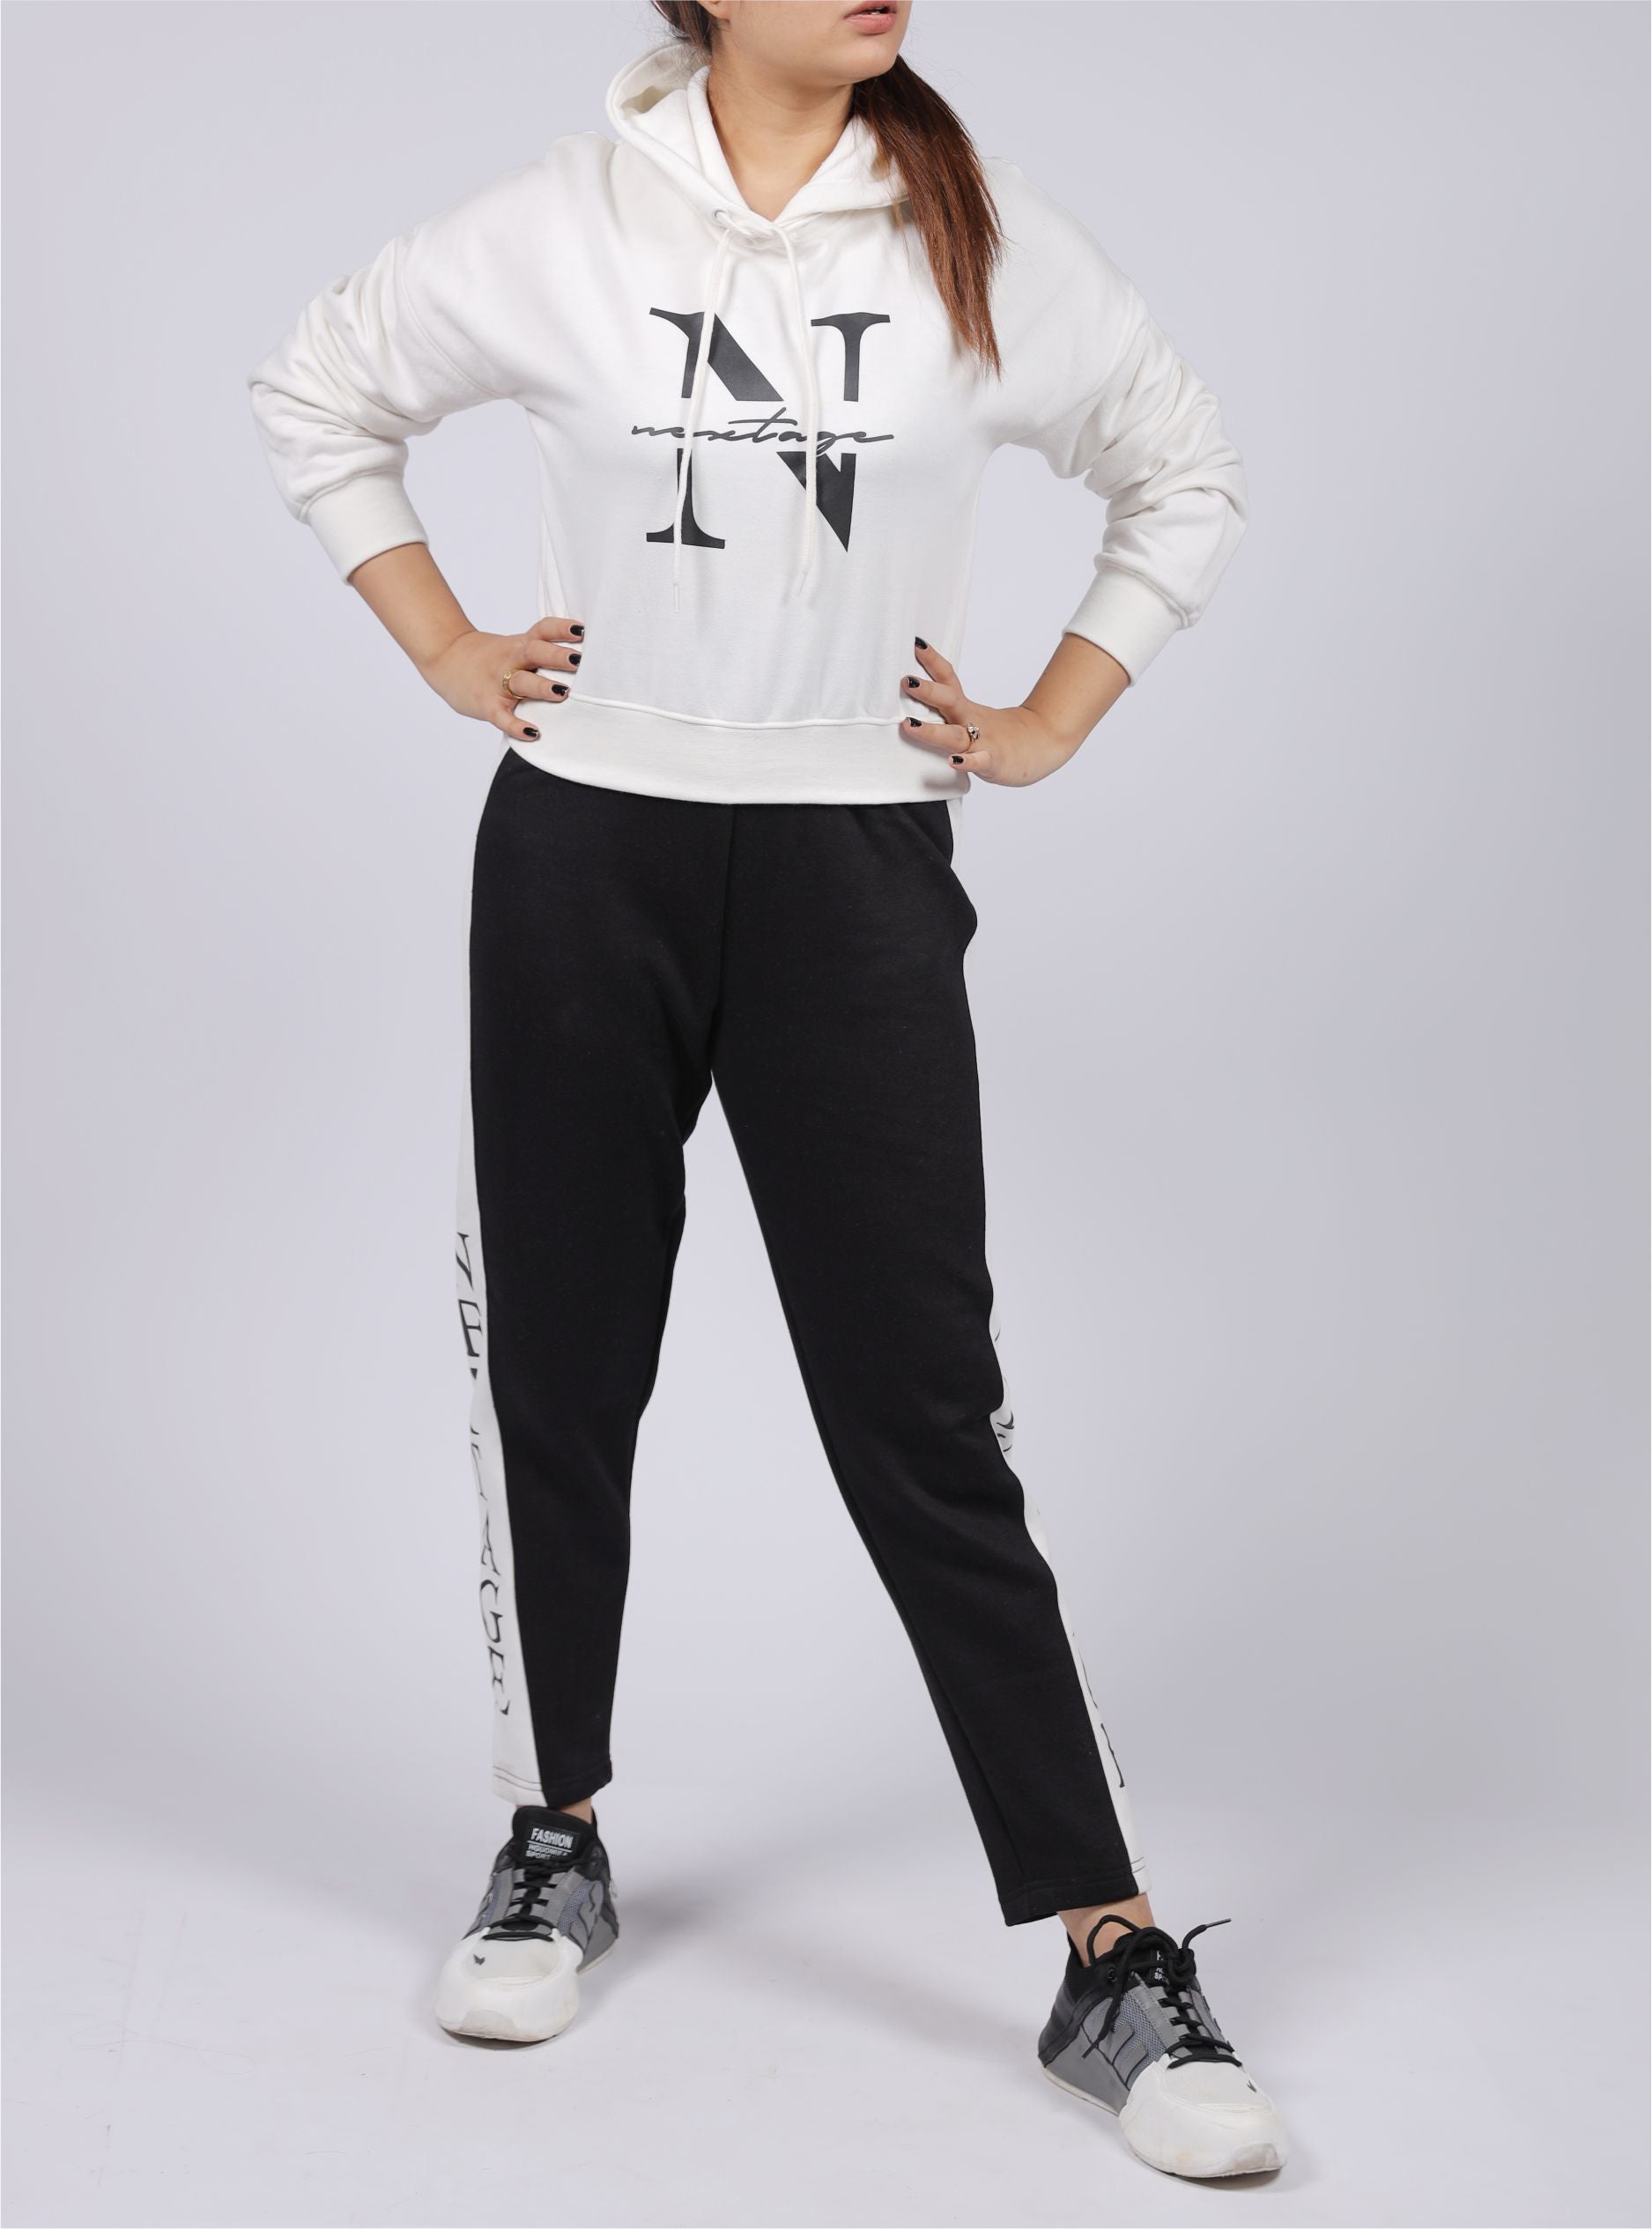 Black Track Suit For Girls And Women Price in Pakistan - View